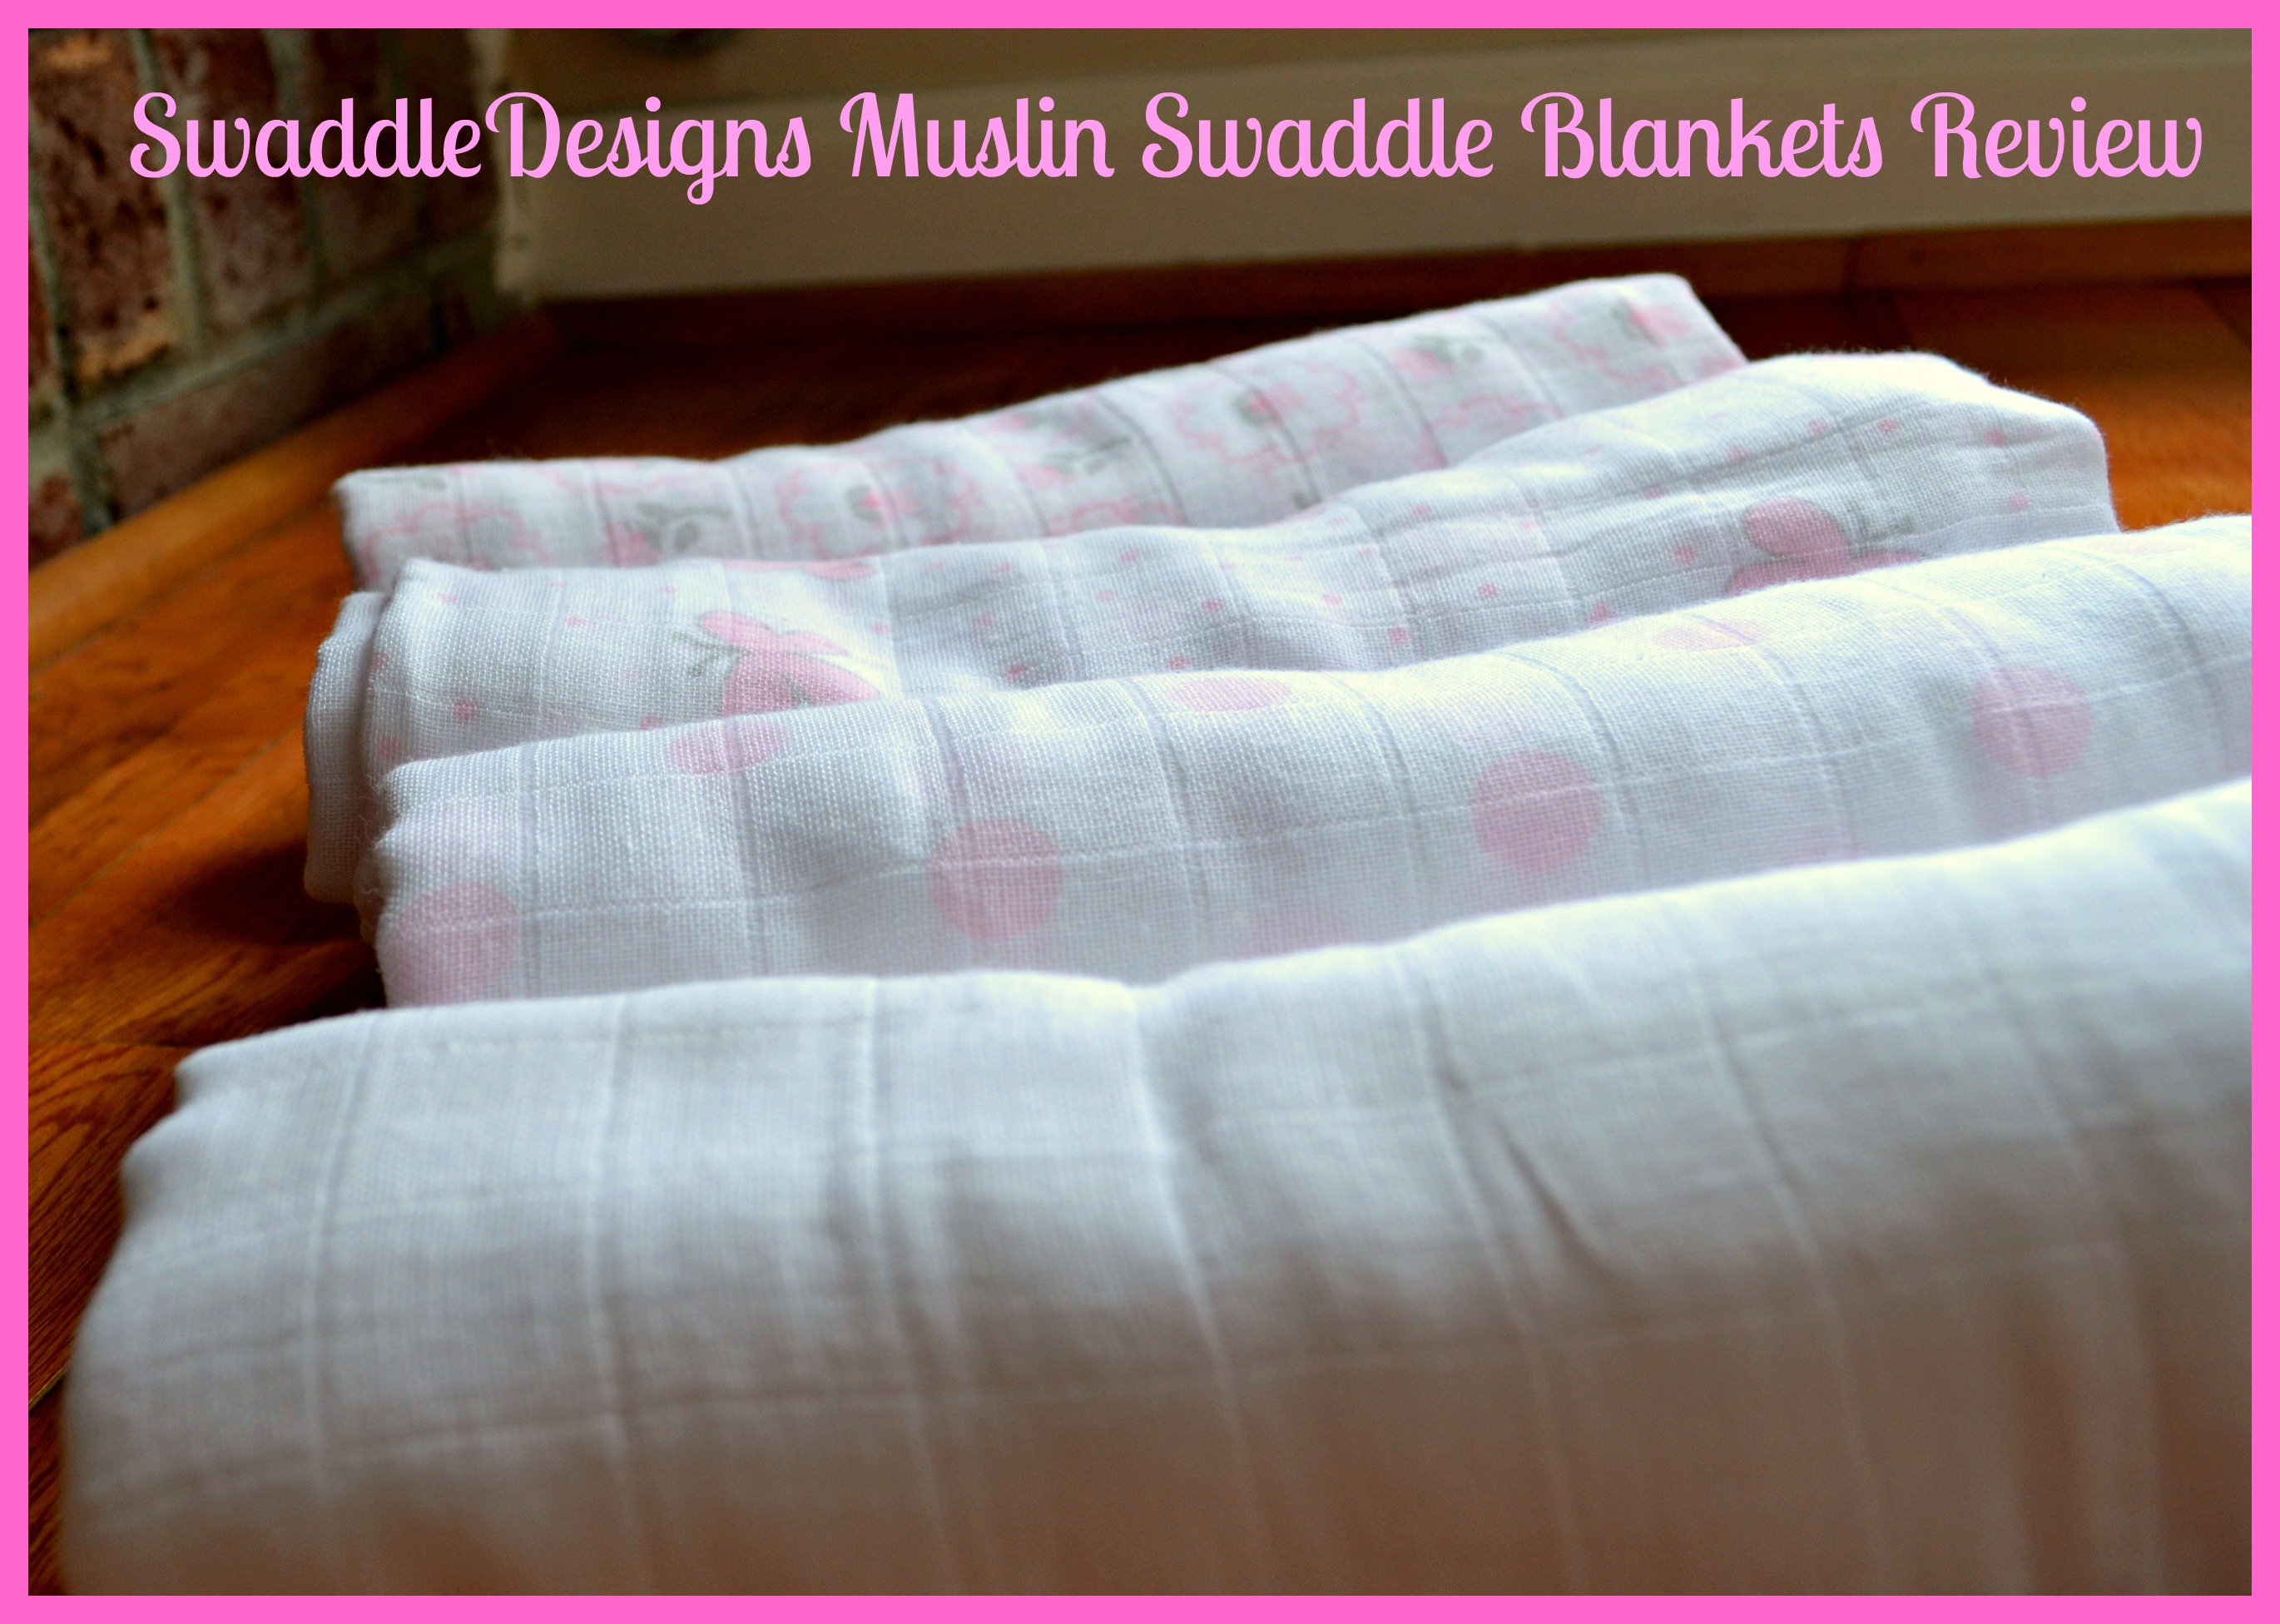 SwaddleDesigns Muslin Swaddle Blankets Review (Getting Ready For Baby Gift Guide)